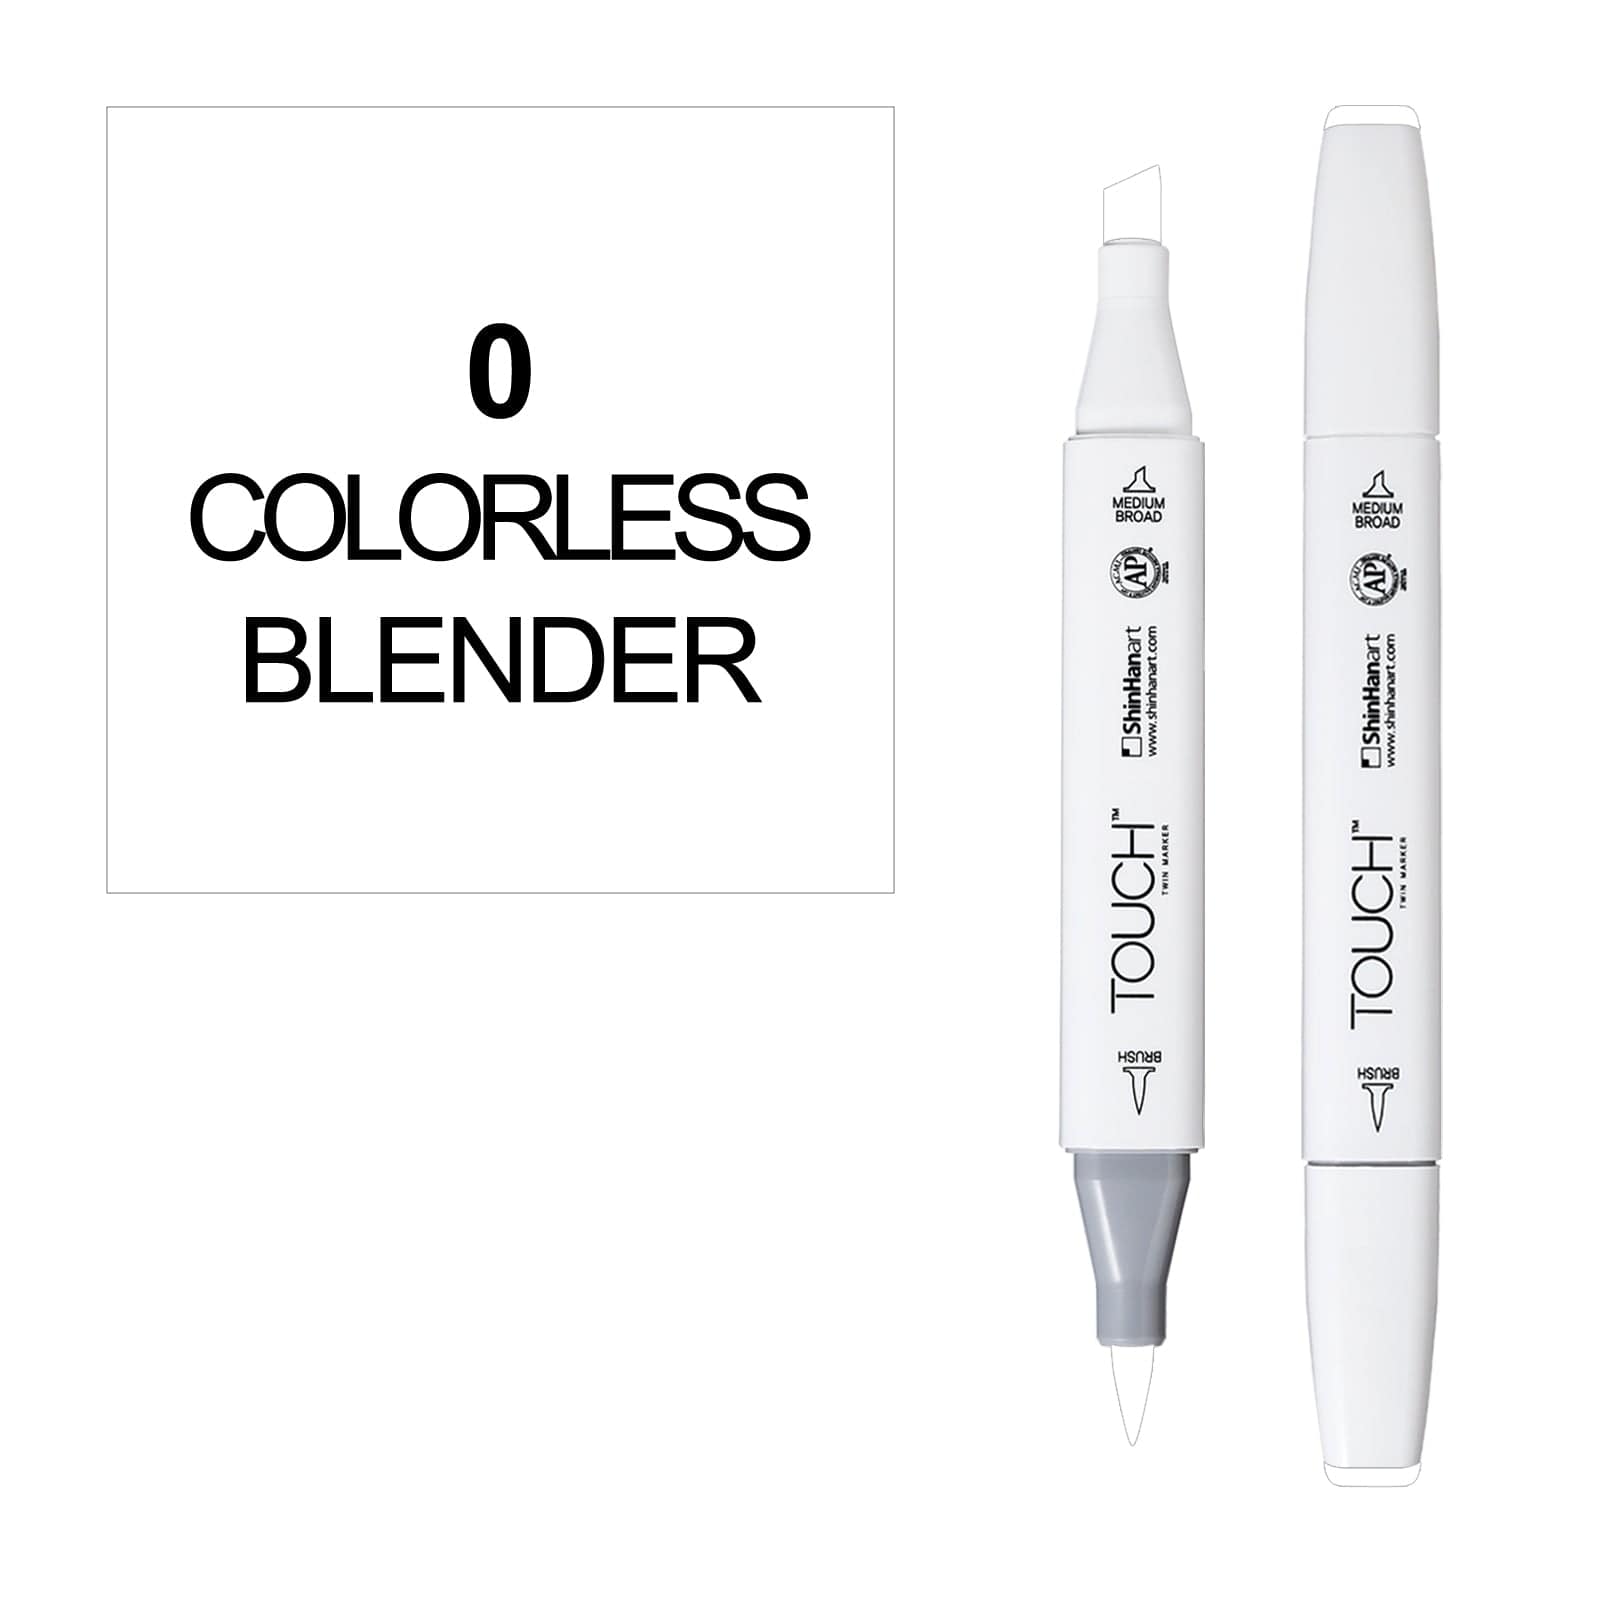 ShinHanart Touch Twin Brush Markers TOUCH TWIN BRUSH /0 colorless blender